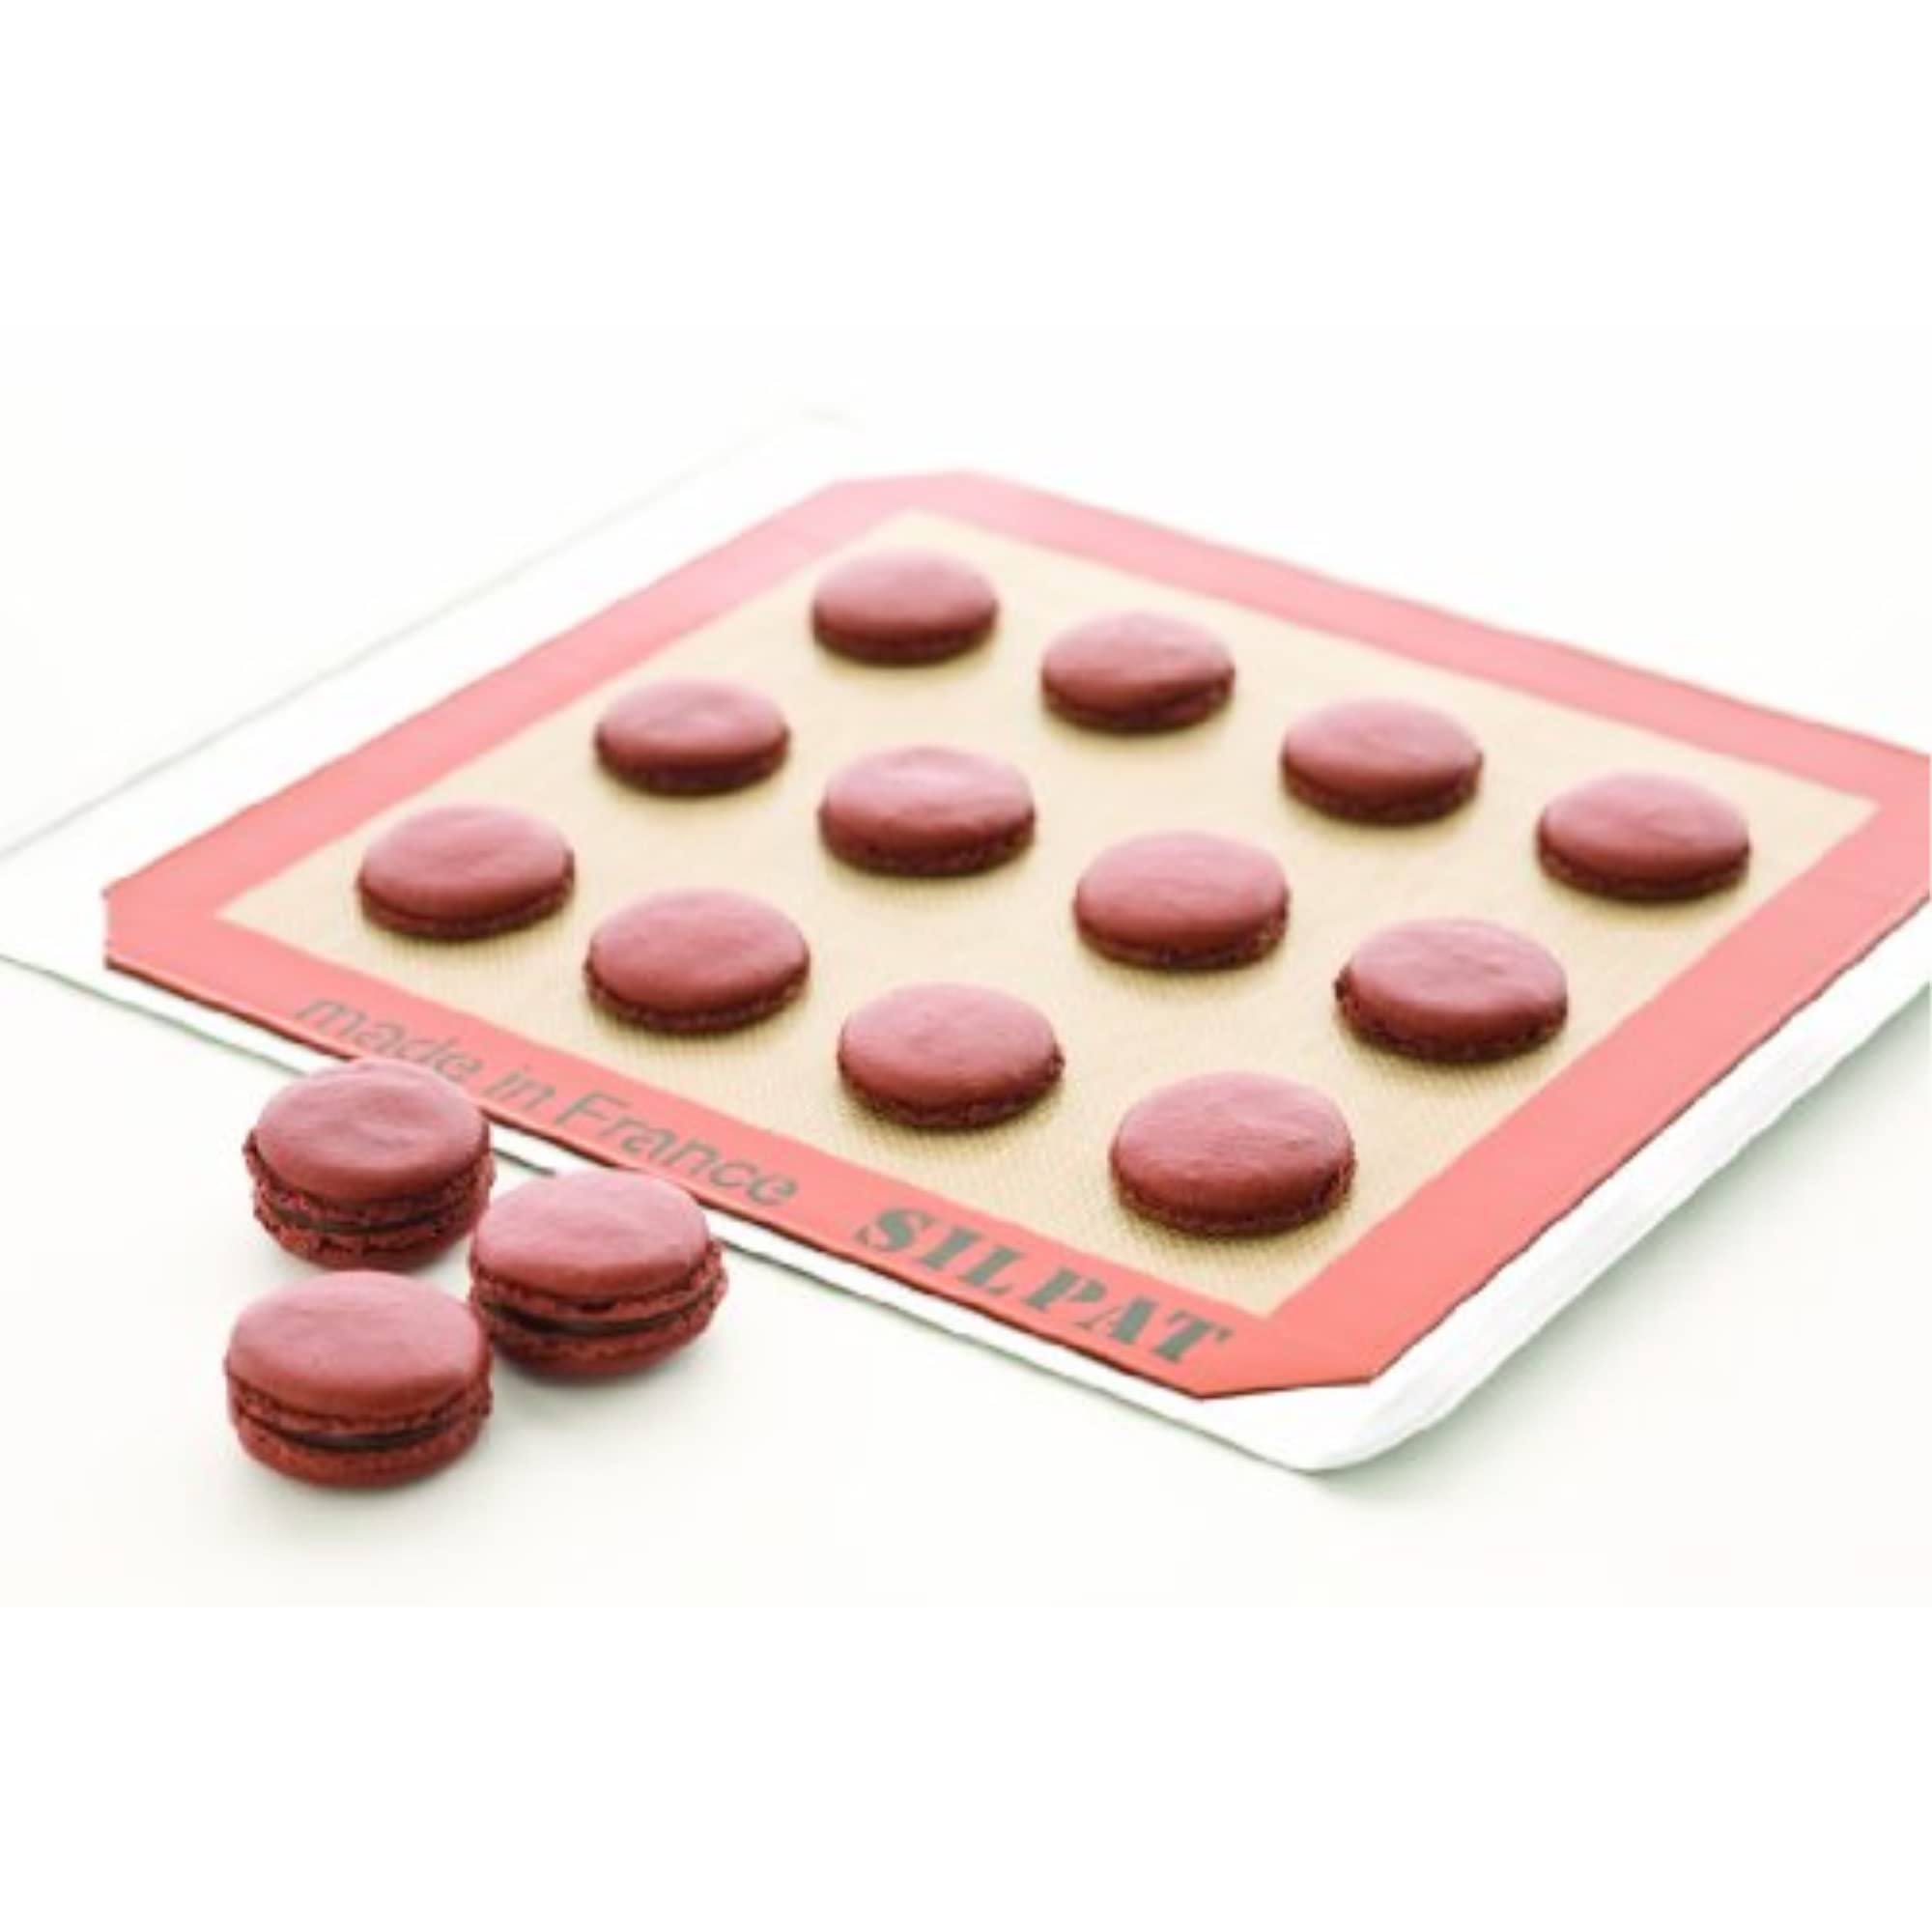 Silpat Non-Stick Silicone Commercial Size Baking Mat, 16.5-Inch by 24.5-Inch